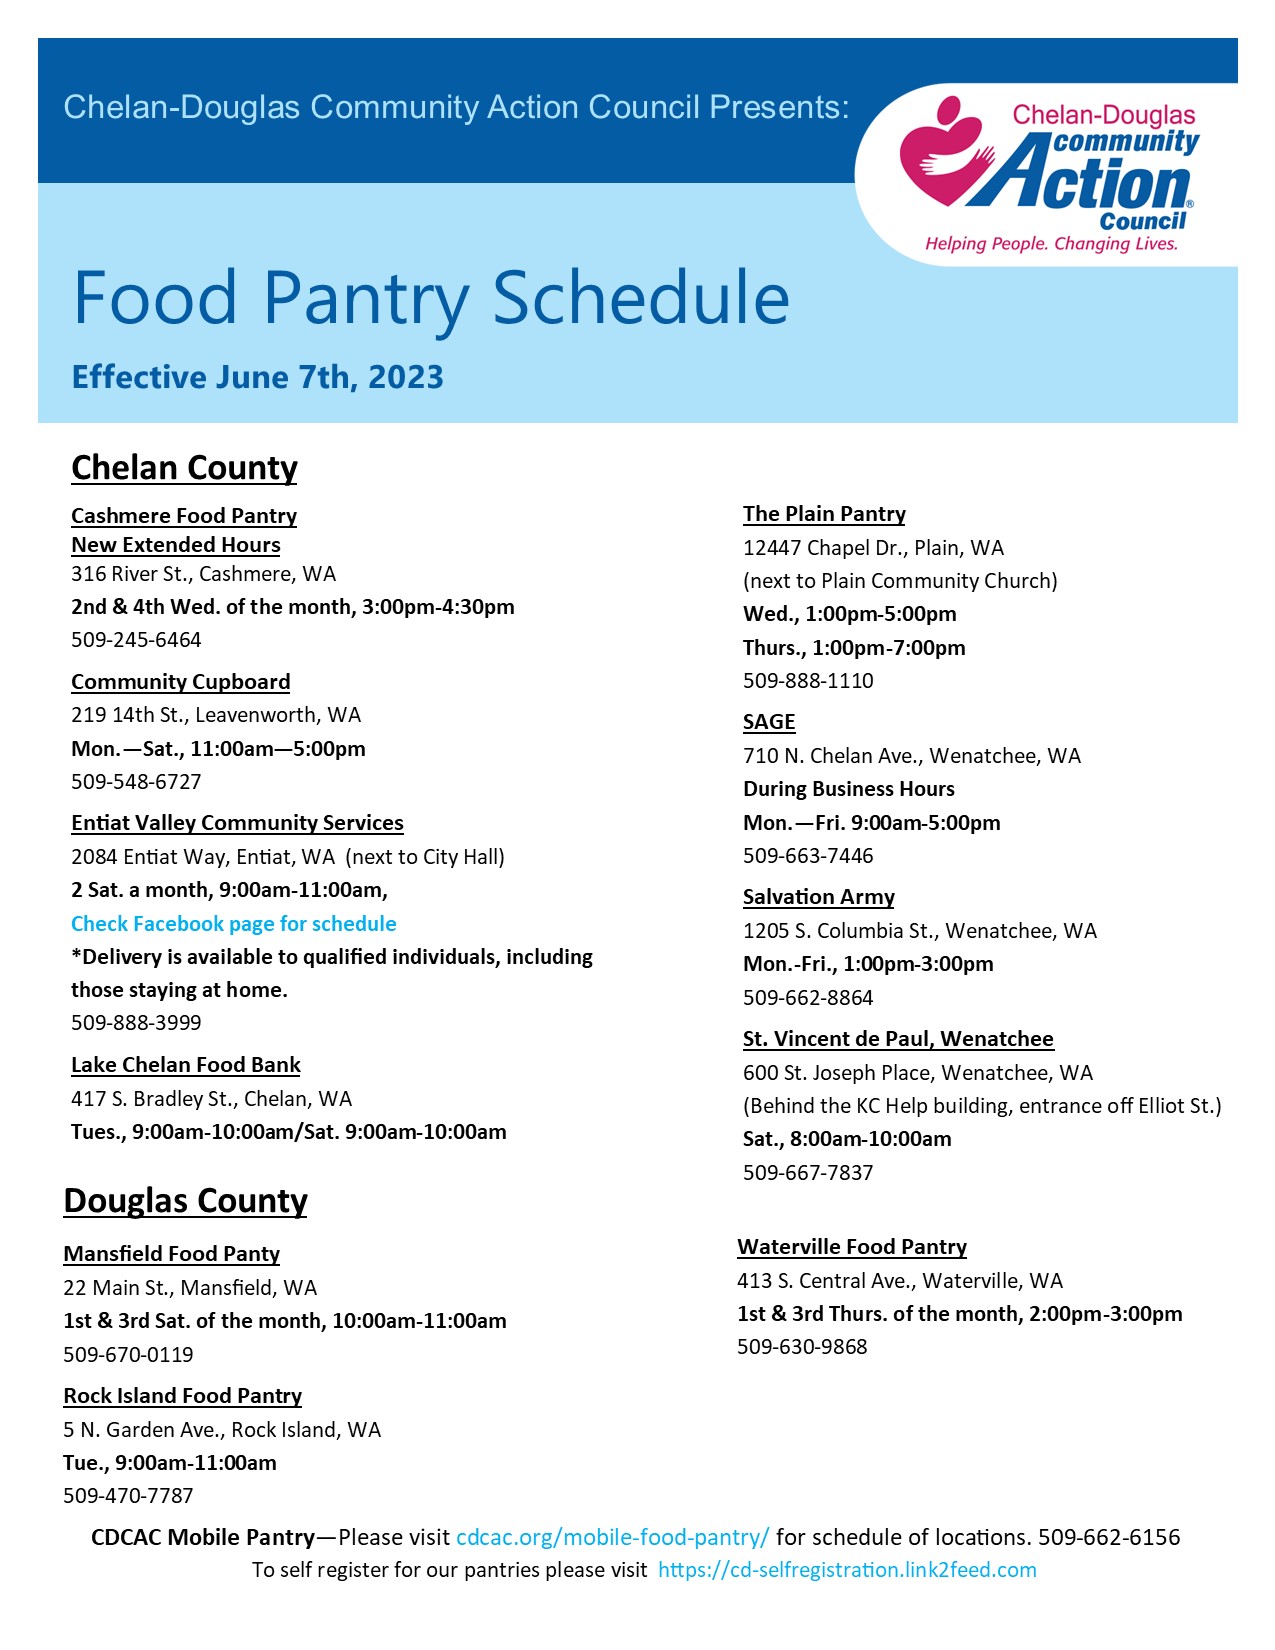 Food Pantry Schedule CDCAC